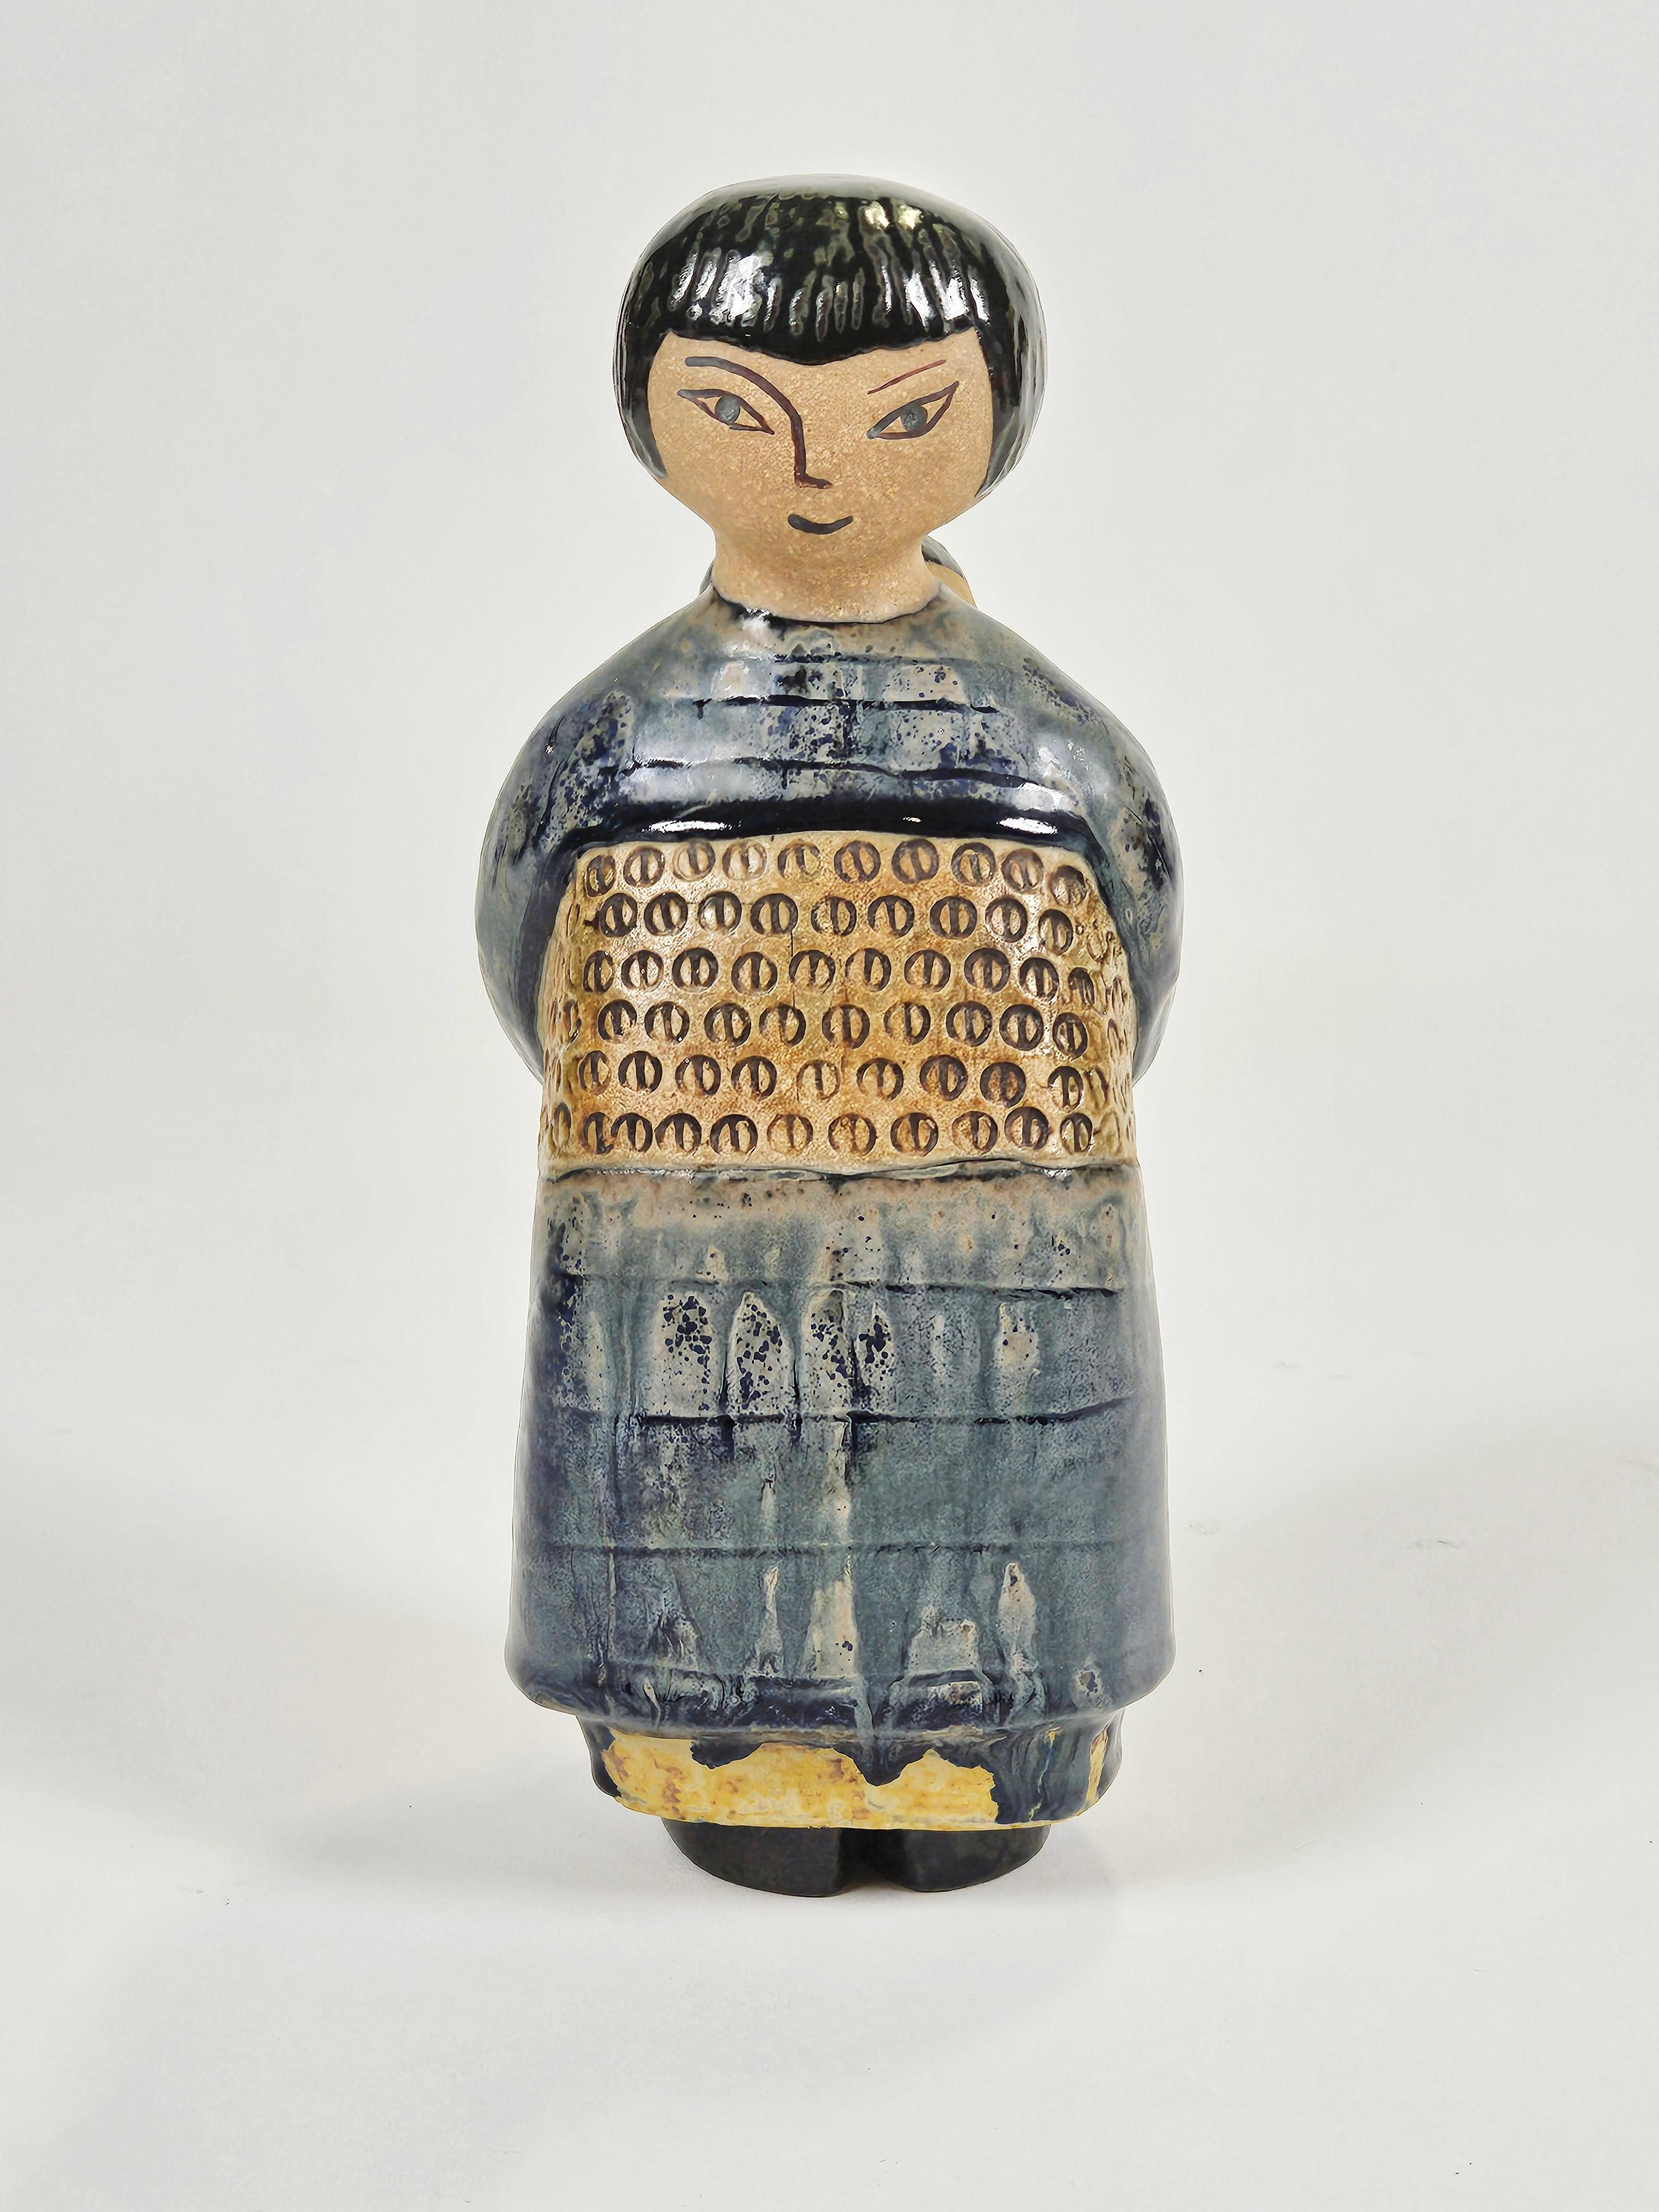 Big stoneware figurine named 'Japanskan' by Lisa Larson, produced by Gustavsberg, Sweden, between 1958 and 1973. 

Beautiful blue glaze. 

Makers mark on bottom.